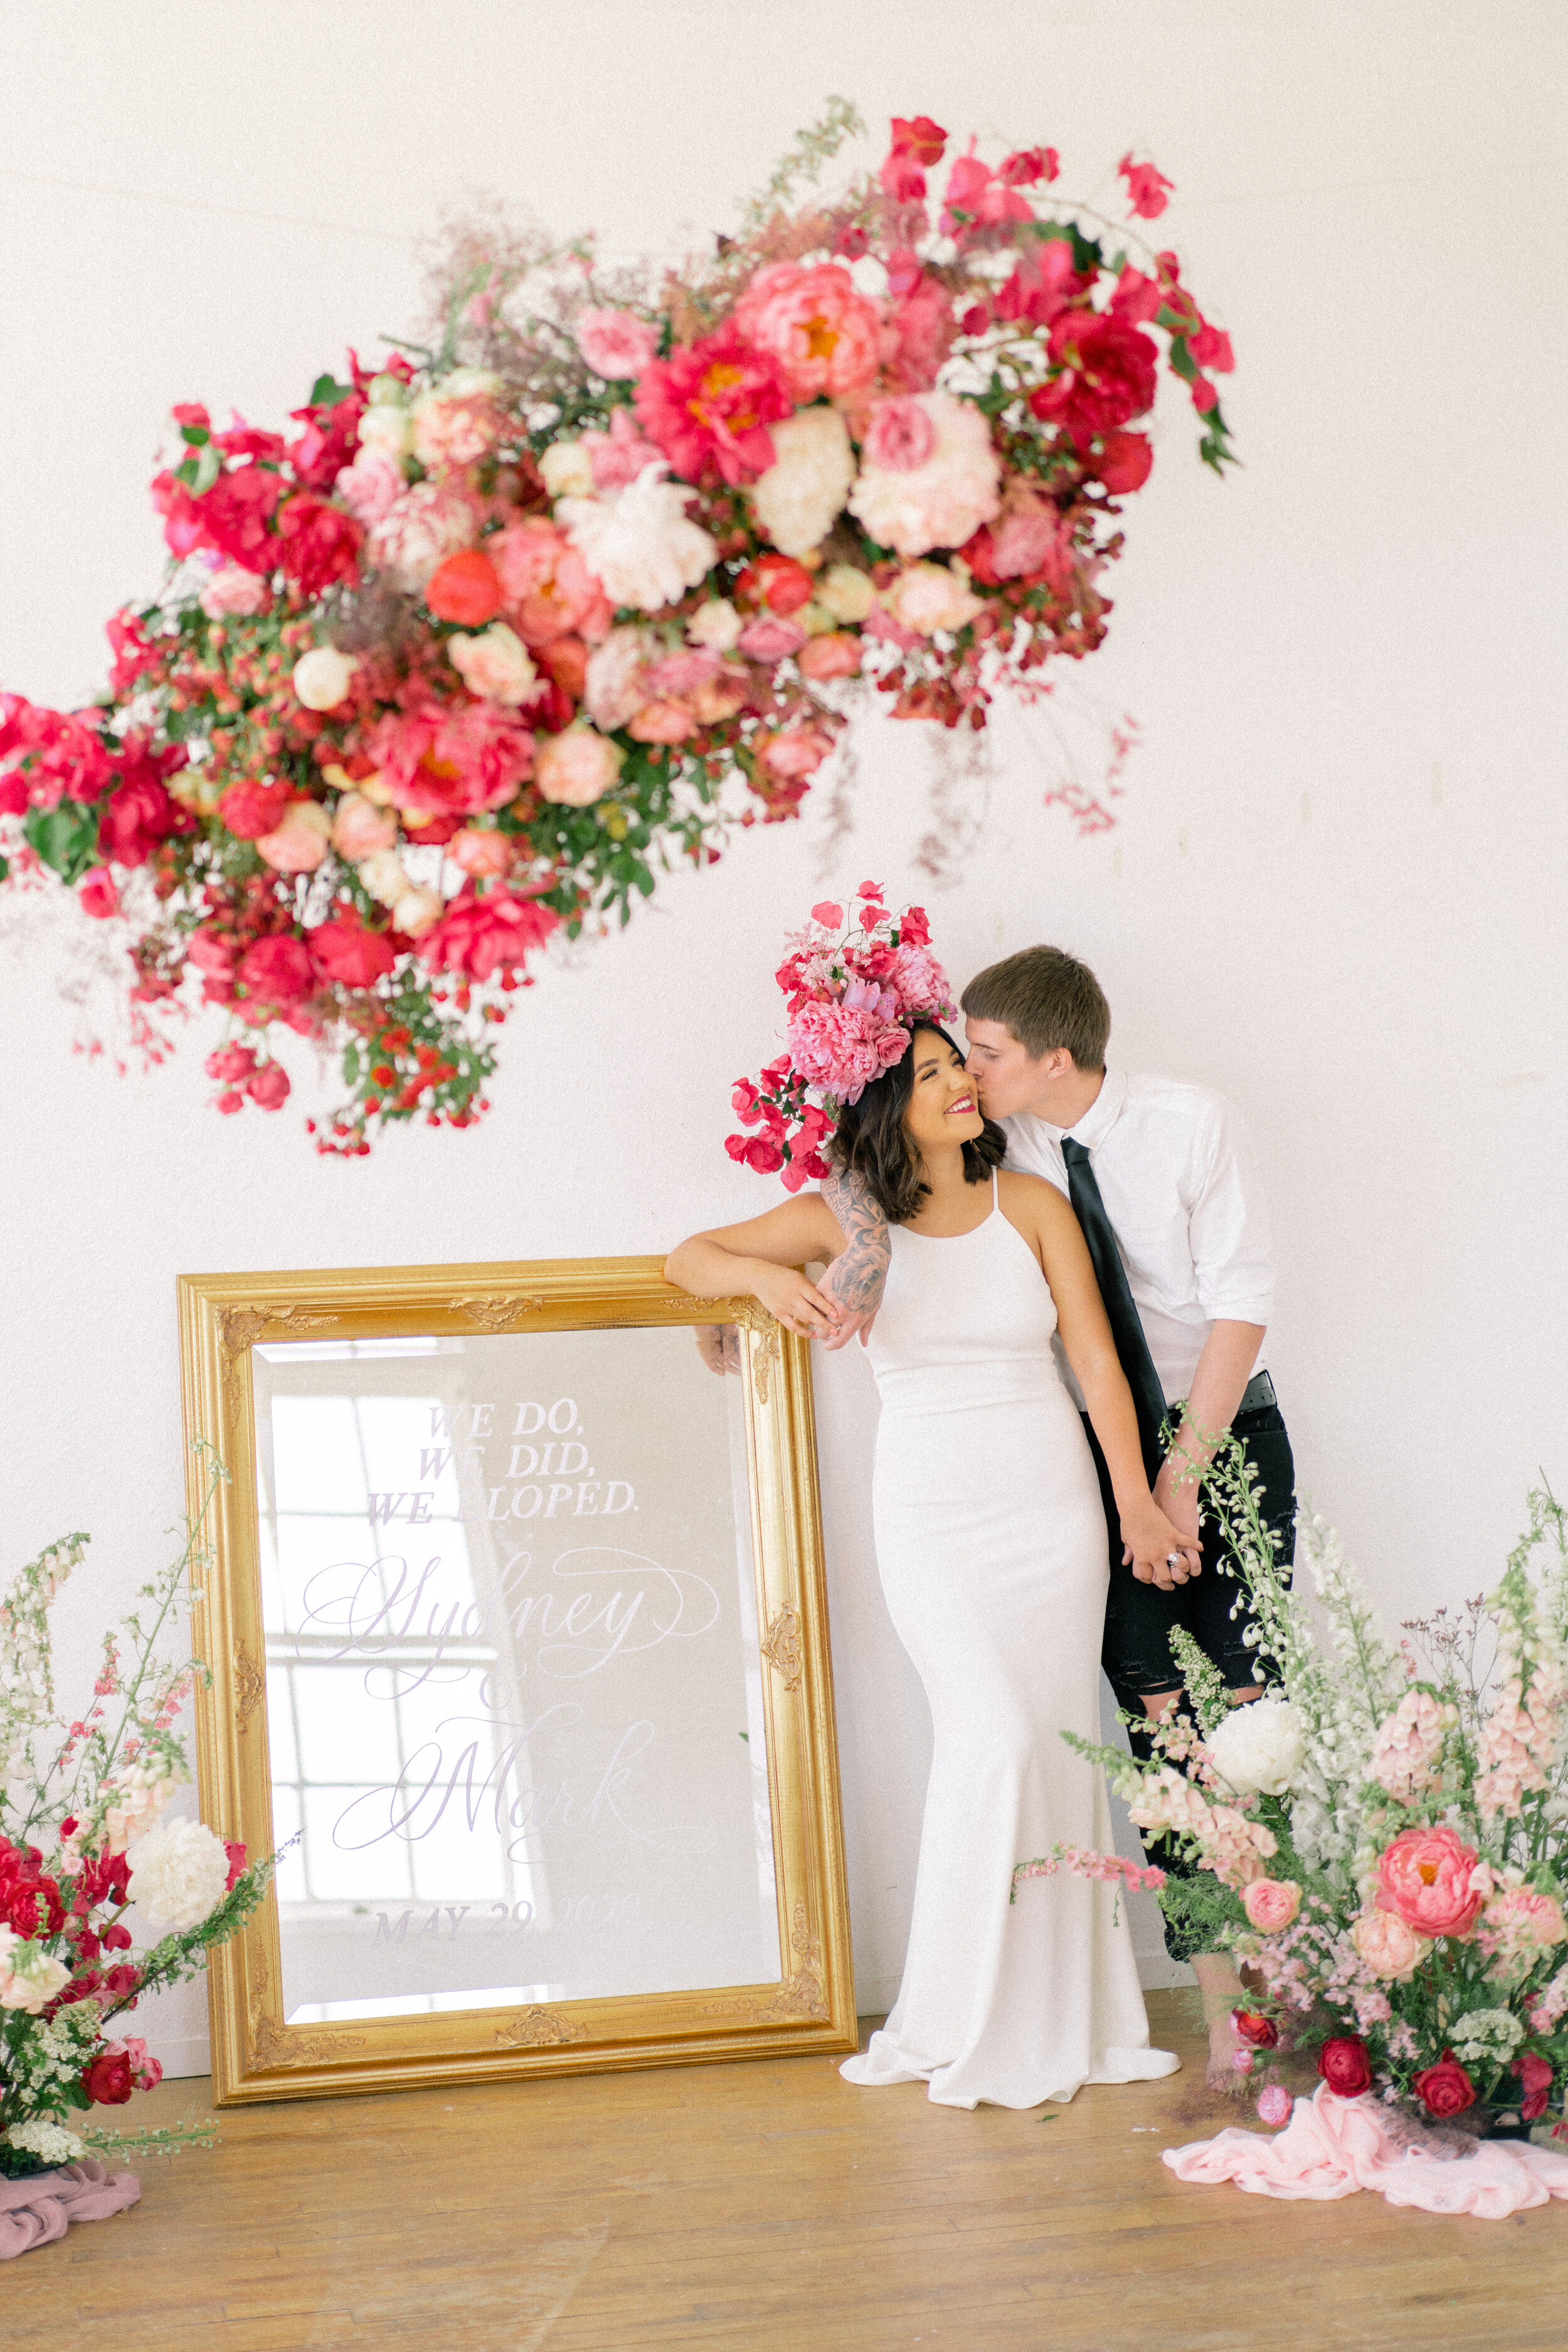 A Romantic Wedding Elopement Filled with Colorful Fuchsia - Sarahi Hadden Submission-97.jpg